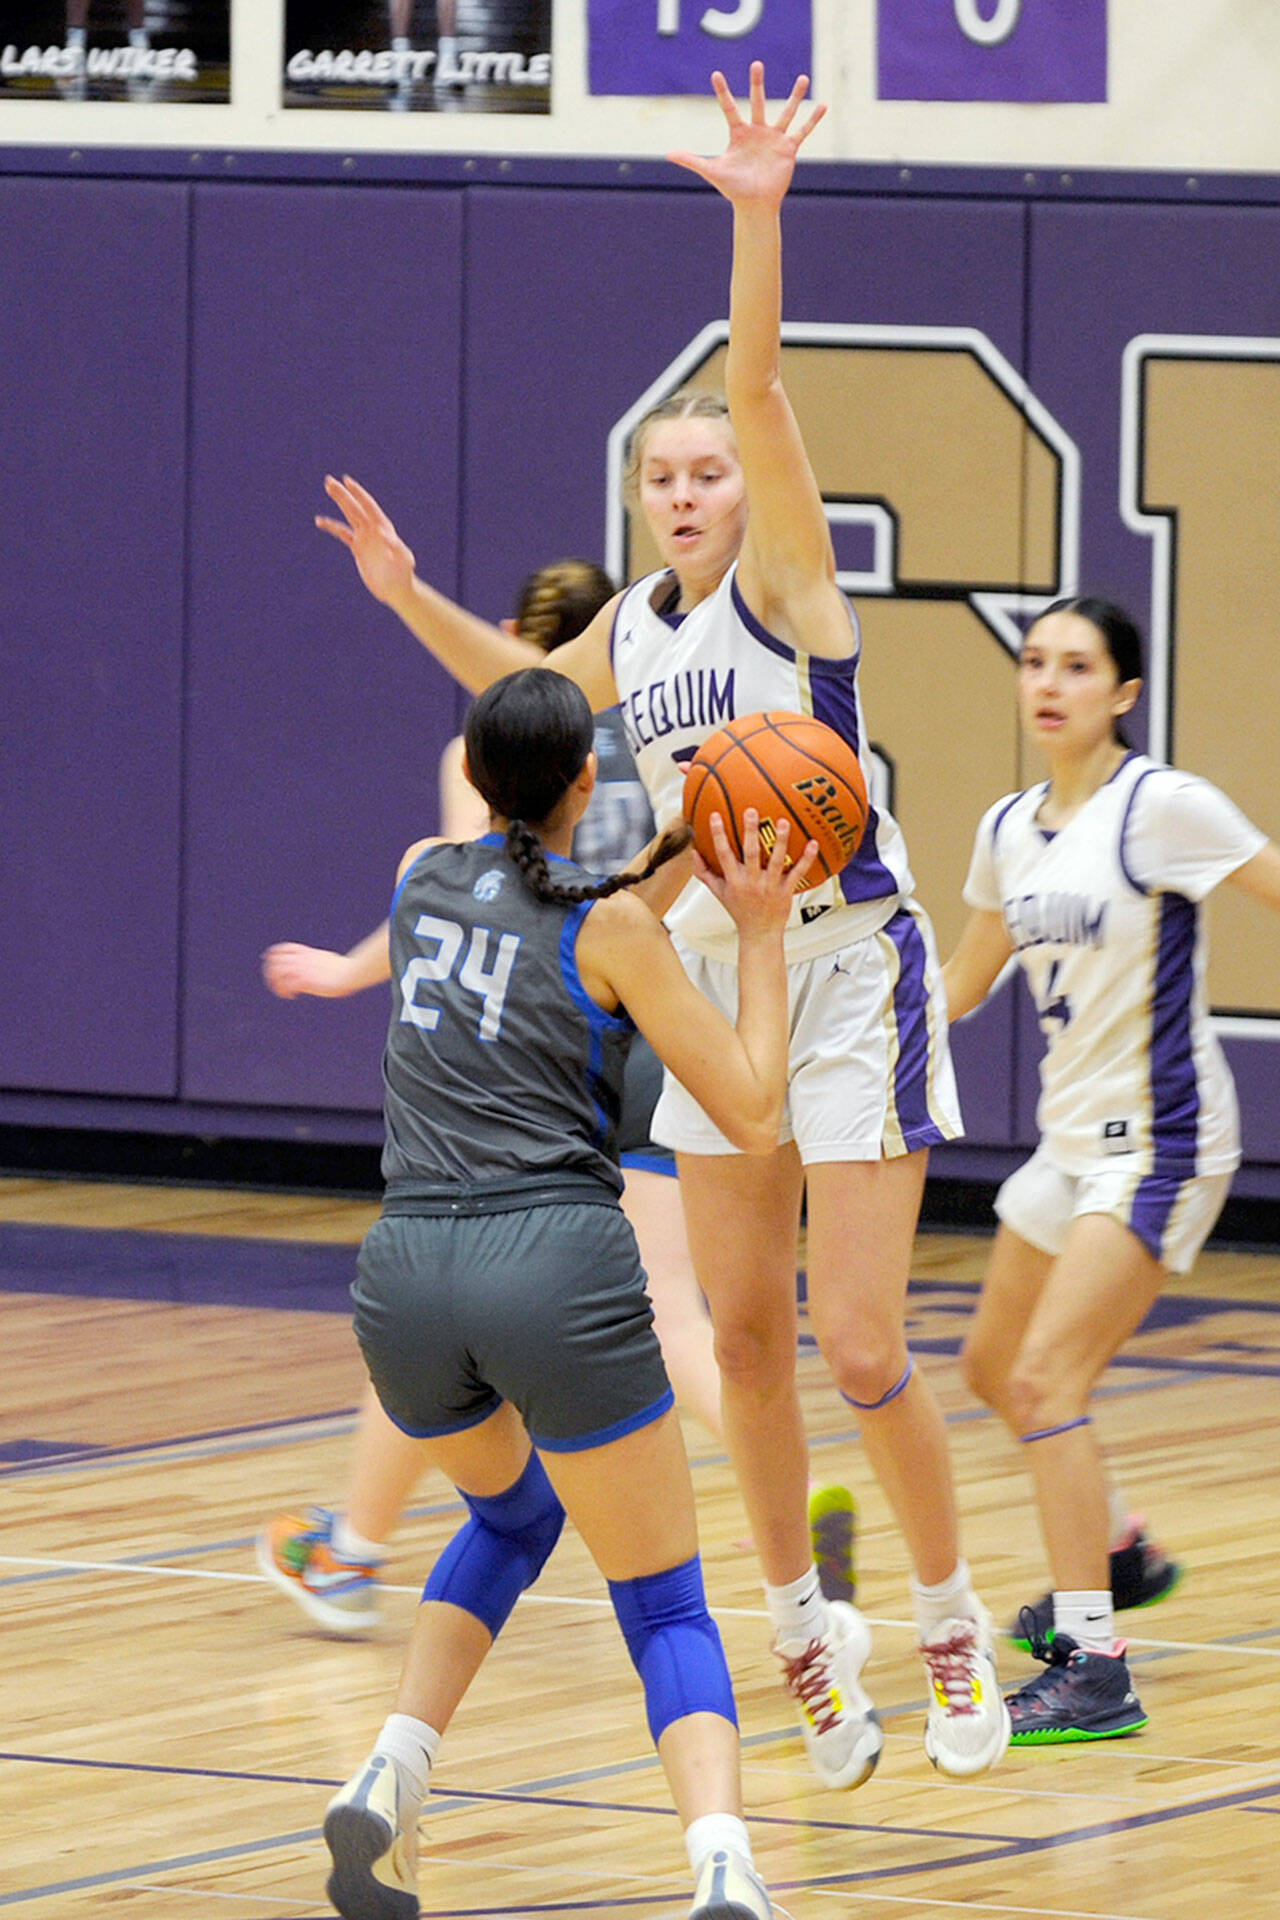 Matthew Nash/Olympic Peninsula News Group Sequim’s Jolene Vaara defends a shot taken by Olympic’s Sophia Brown as the Wolves’ Gracie Chartraw looks on during Sequim’s 81-44 win Thursday.